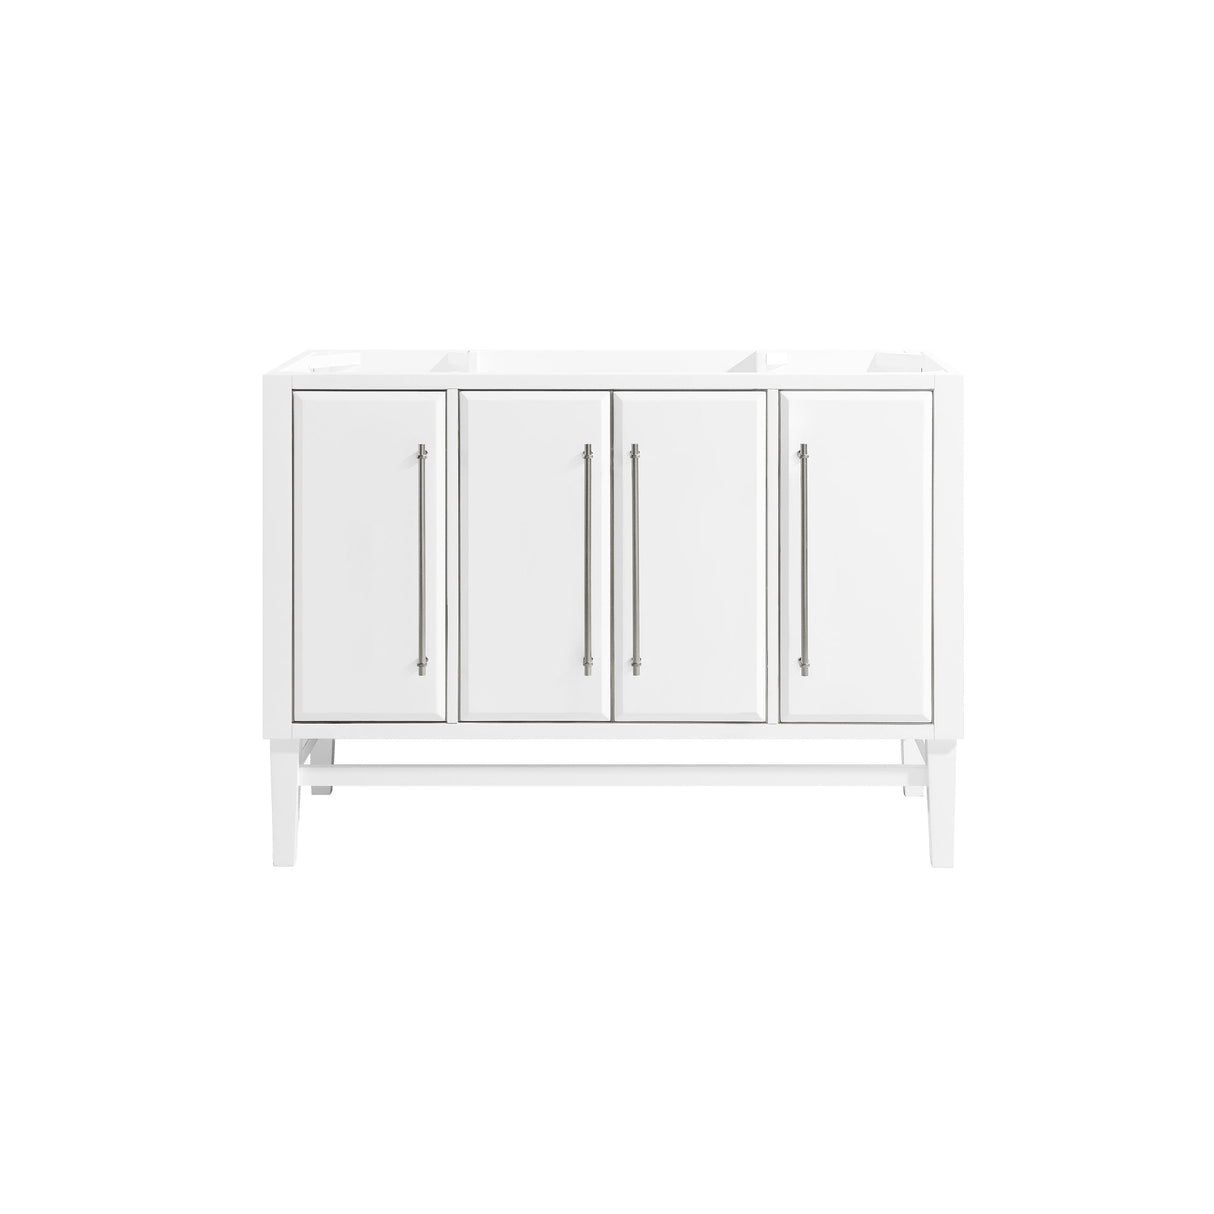 Avanity Mason 48 in. Vanity Only in White with Silver Trim